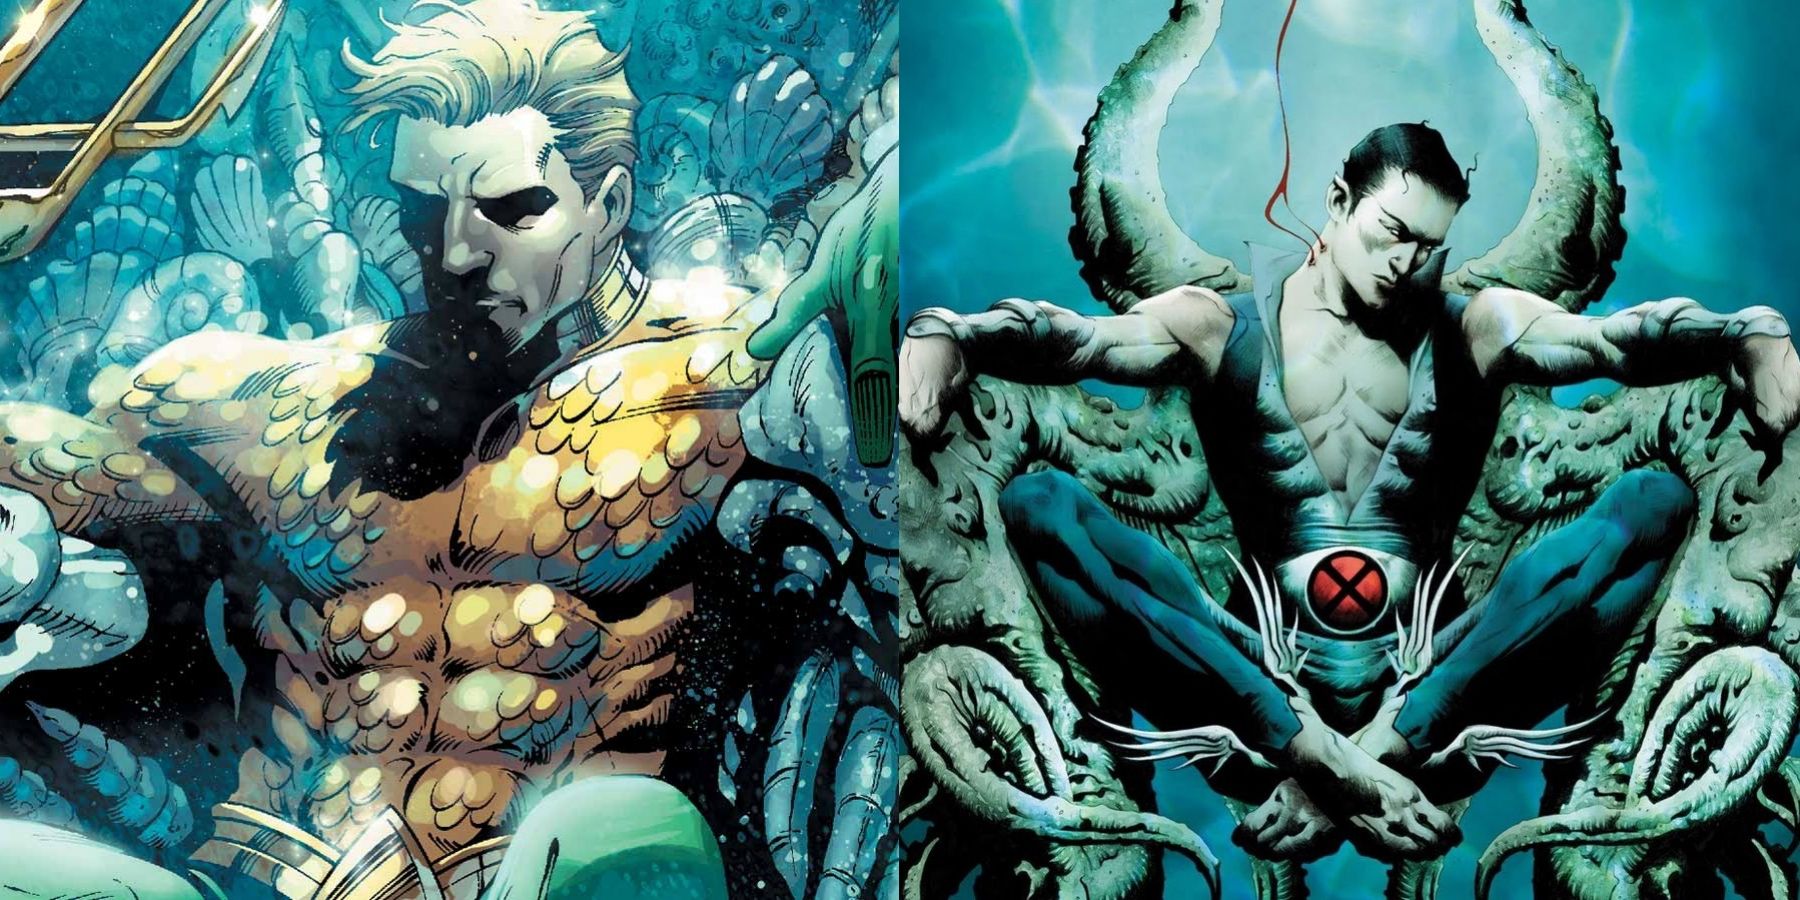 Aquaman and Namor sitting on throne from comic books